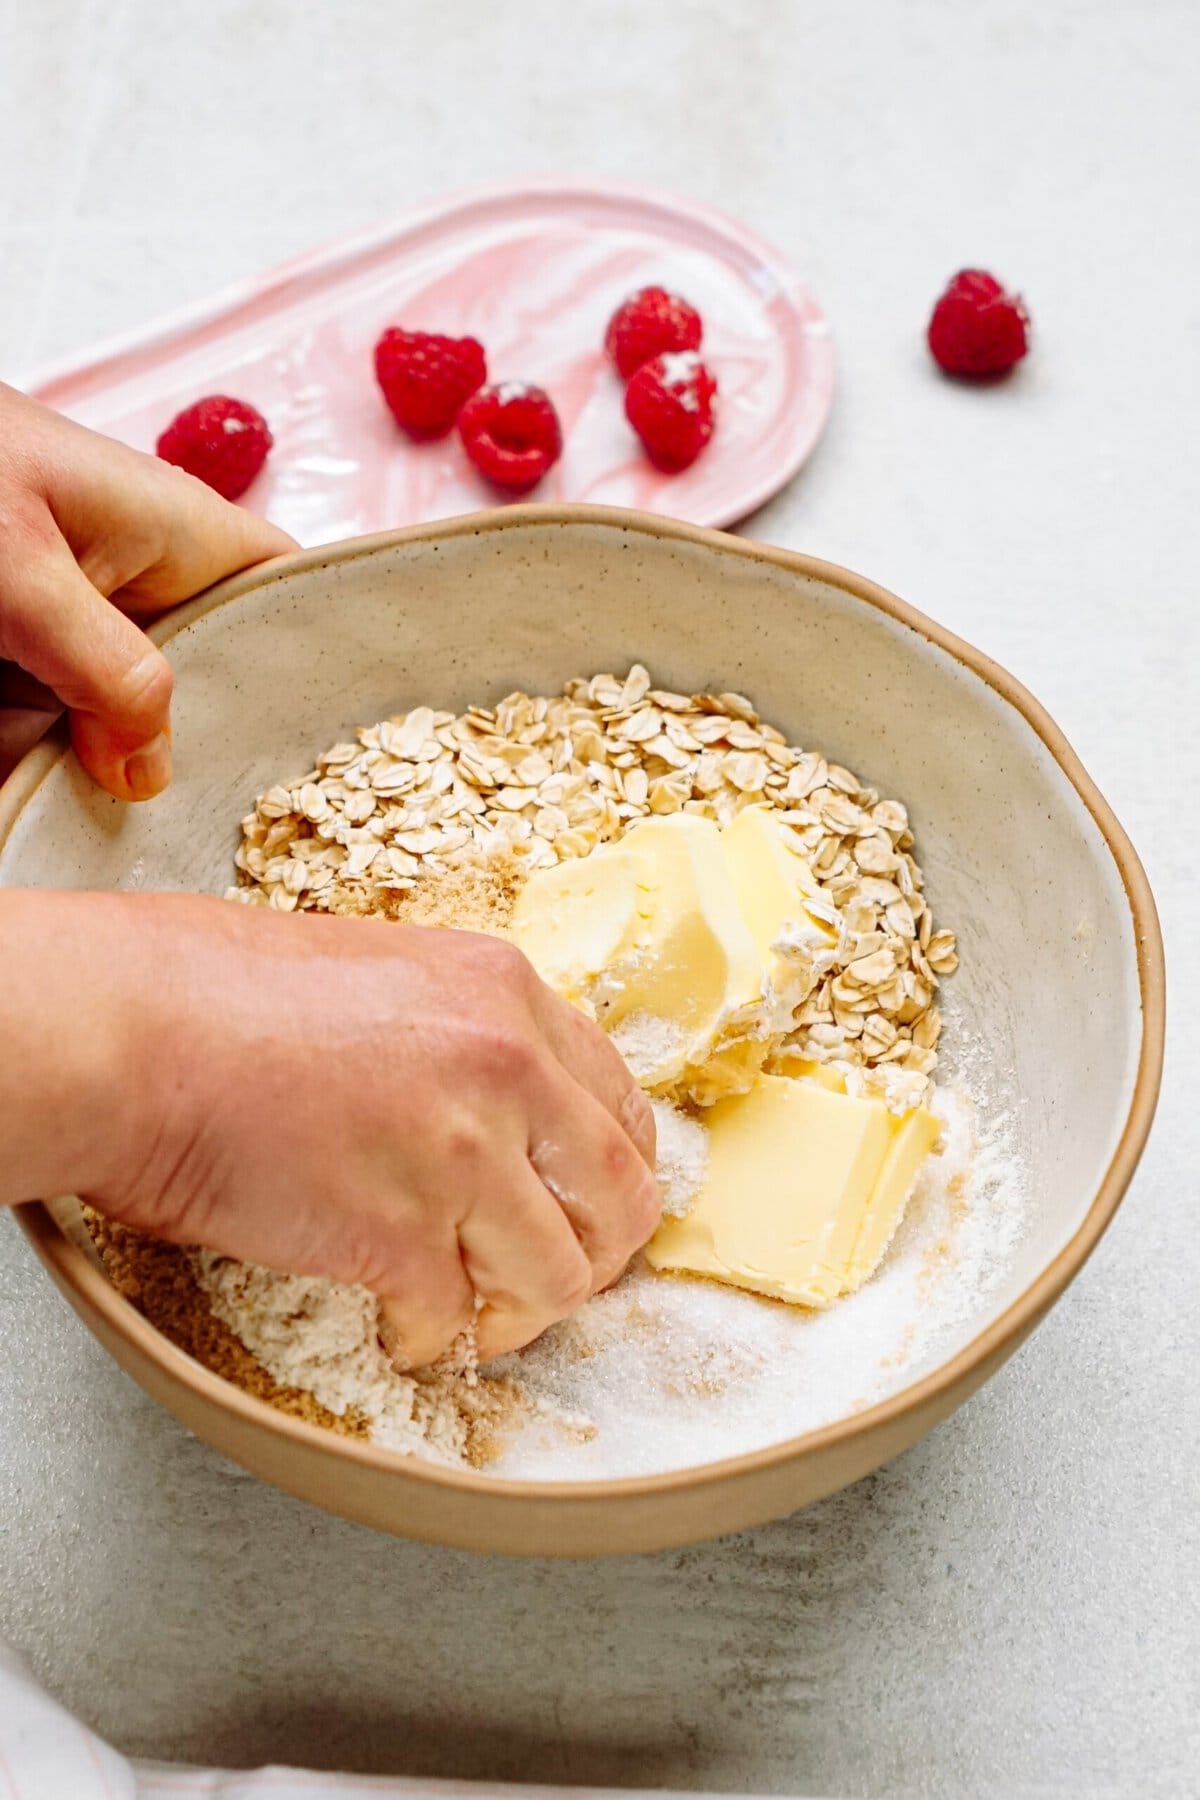 Hands mixing flour, oats, and butter in a bowl. A pink plate with raspberries is in the background.